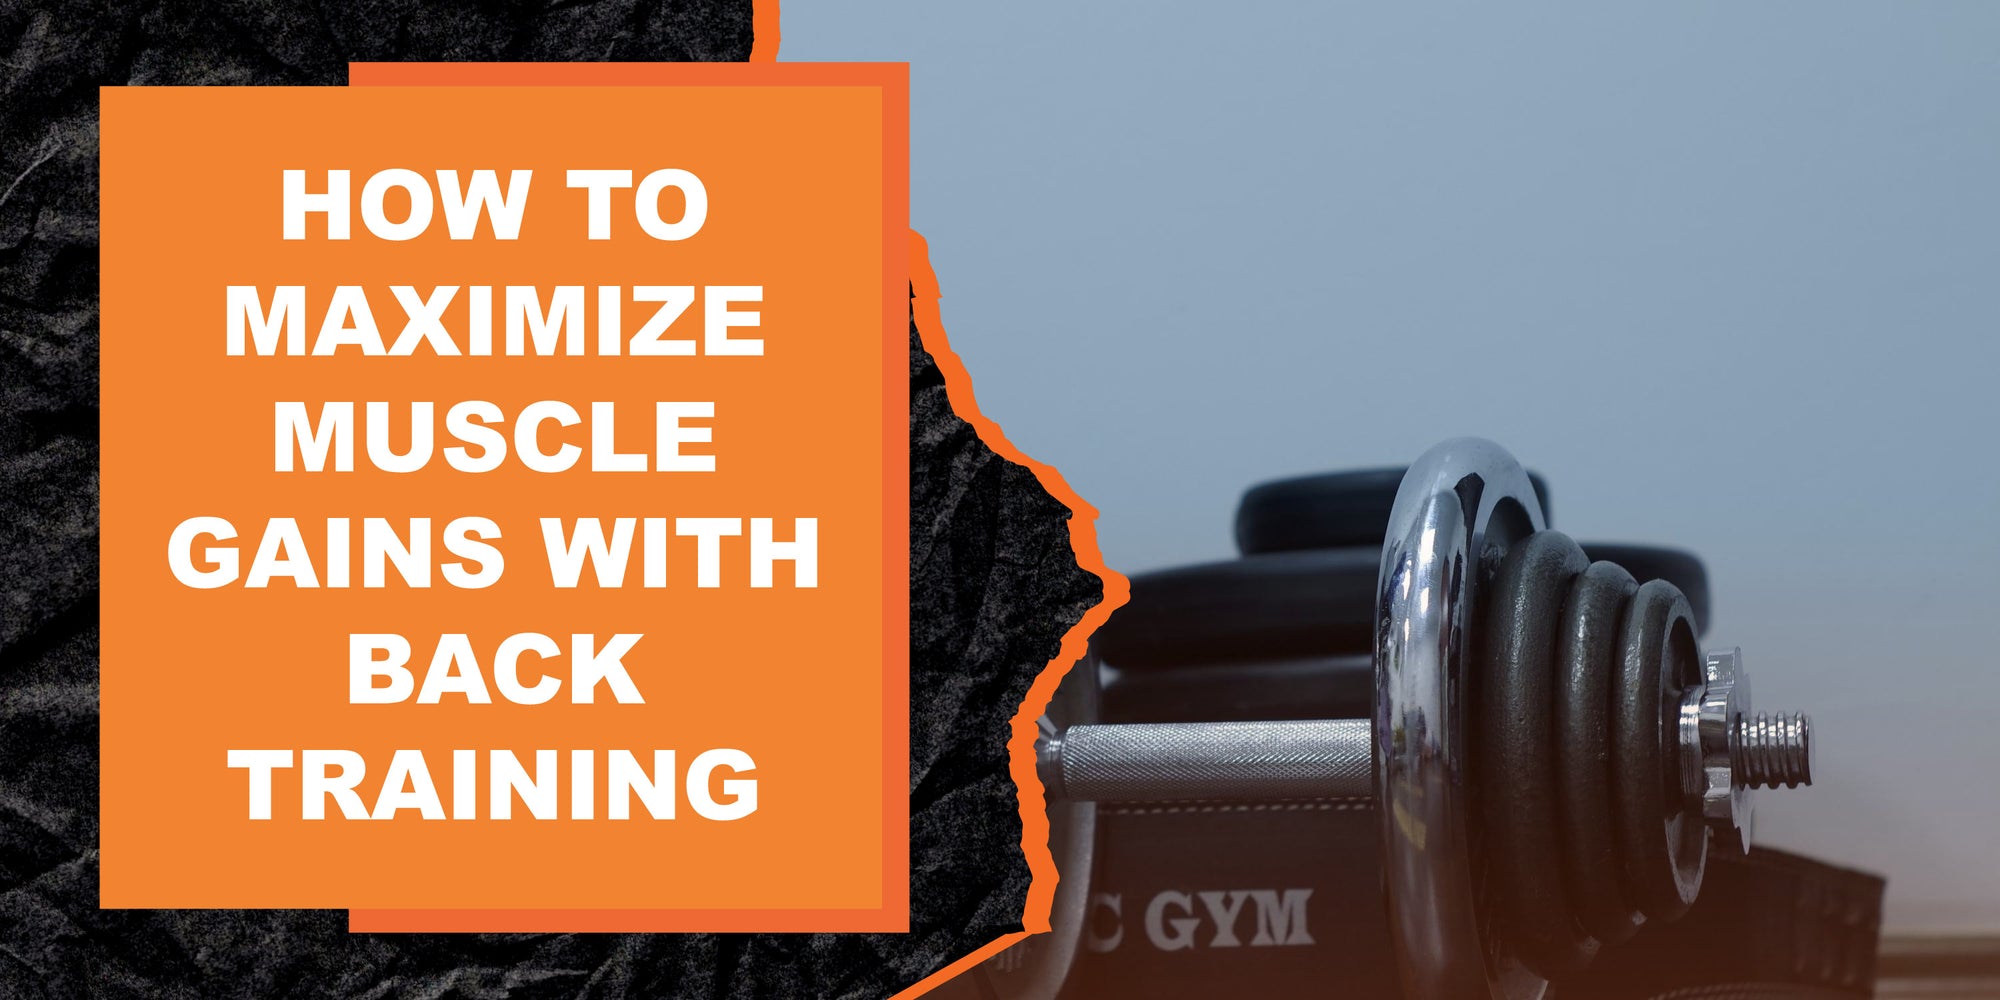 How to Maximize Muscle Gains with Back Training